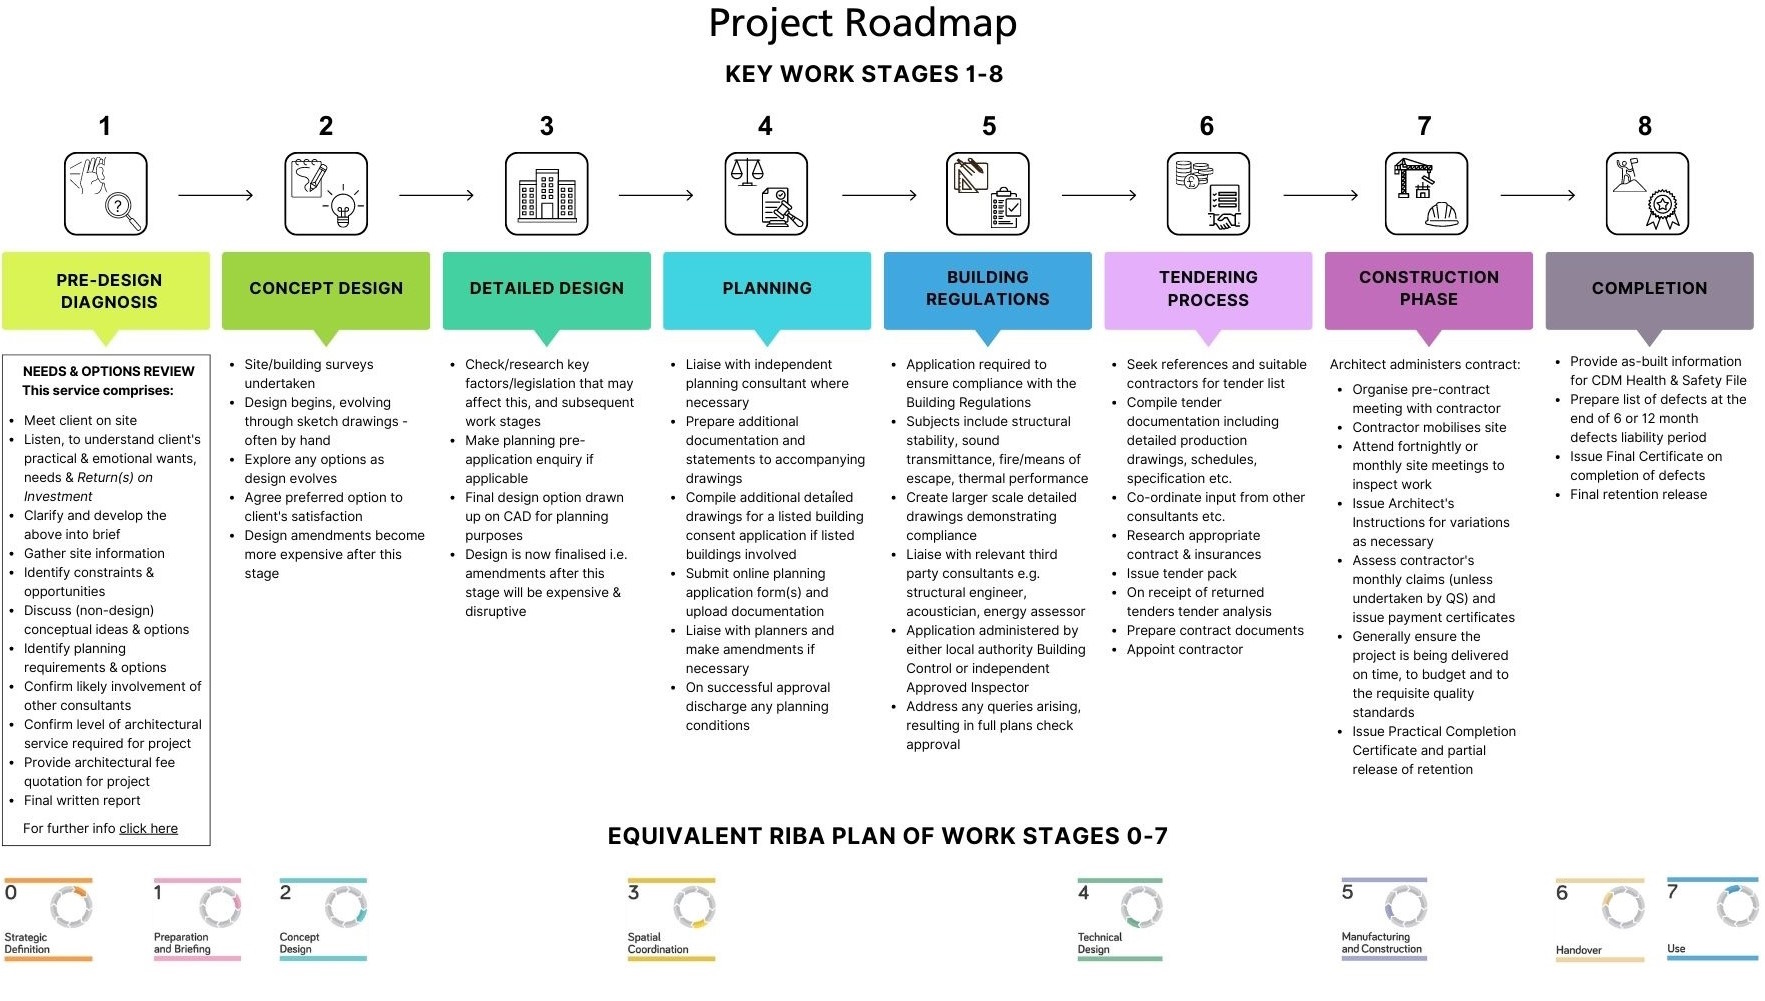 Roadmap - Click to see Needs & Options Review